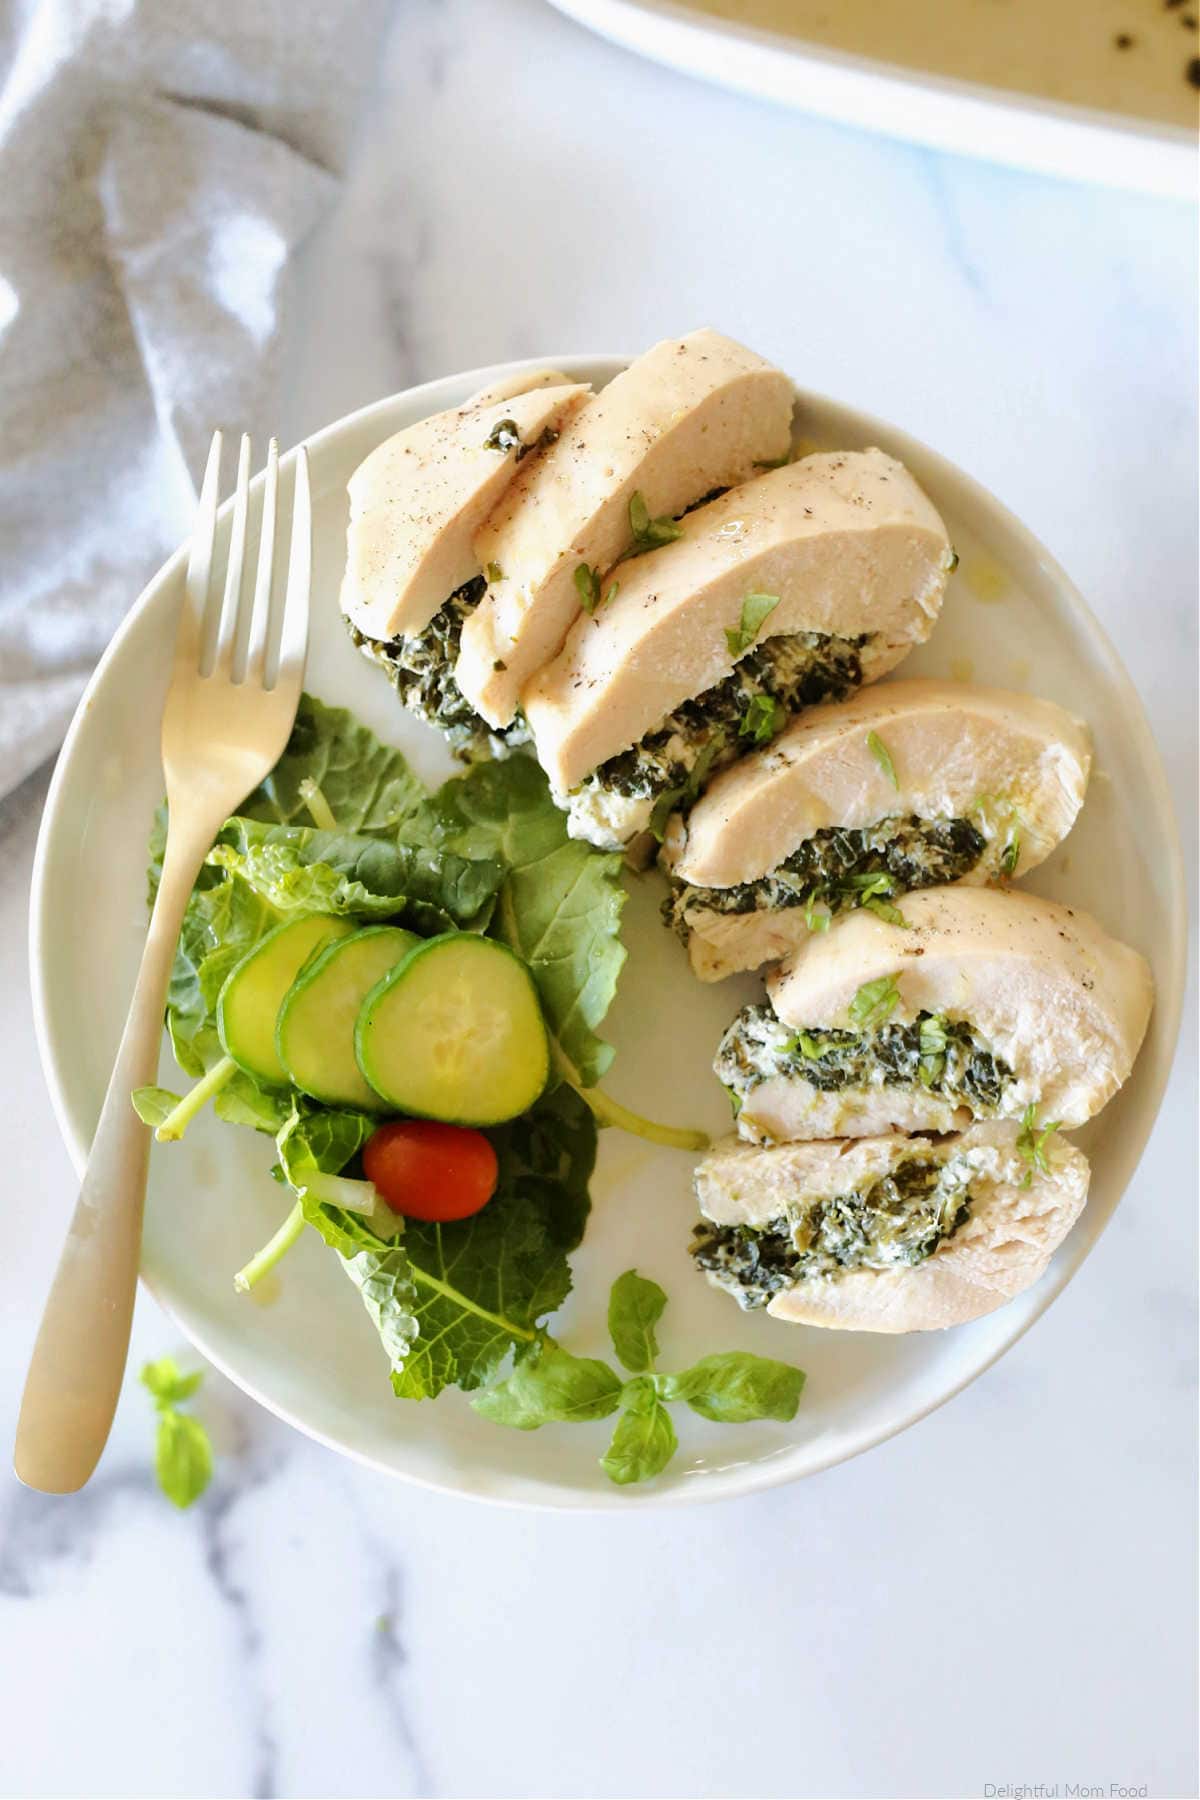 perfectly baked stuffed chicken breast sliced on a plate with a side salad